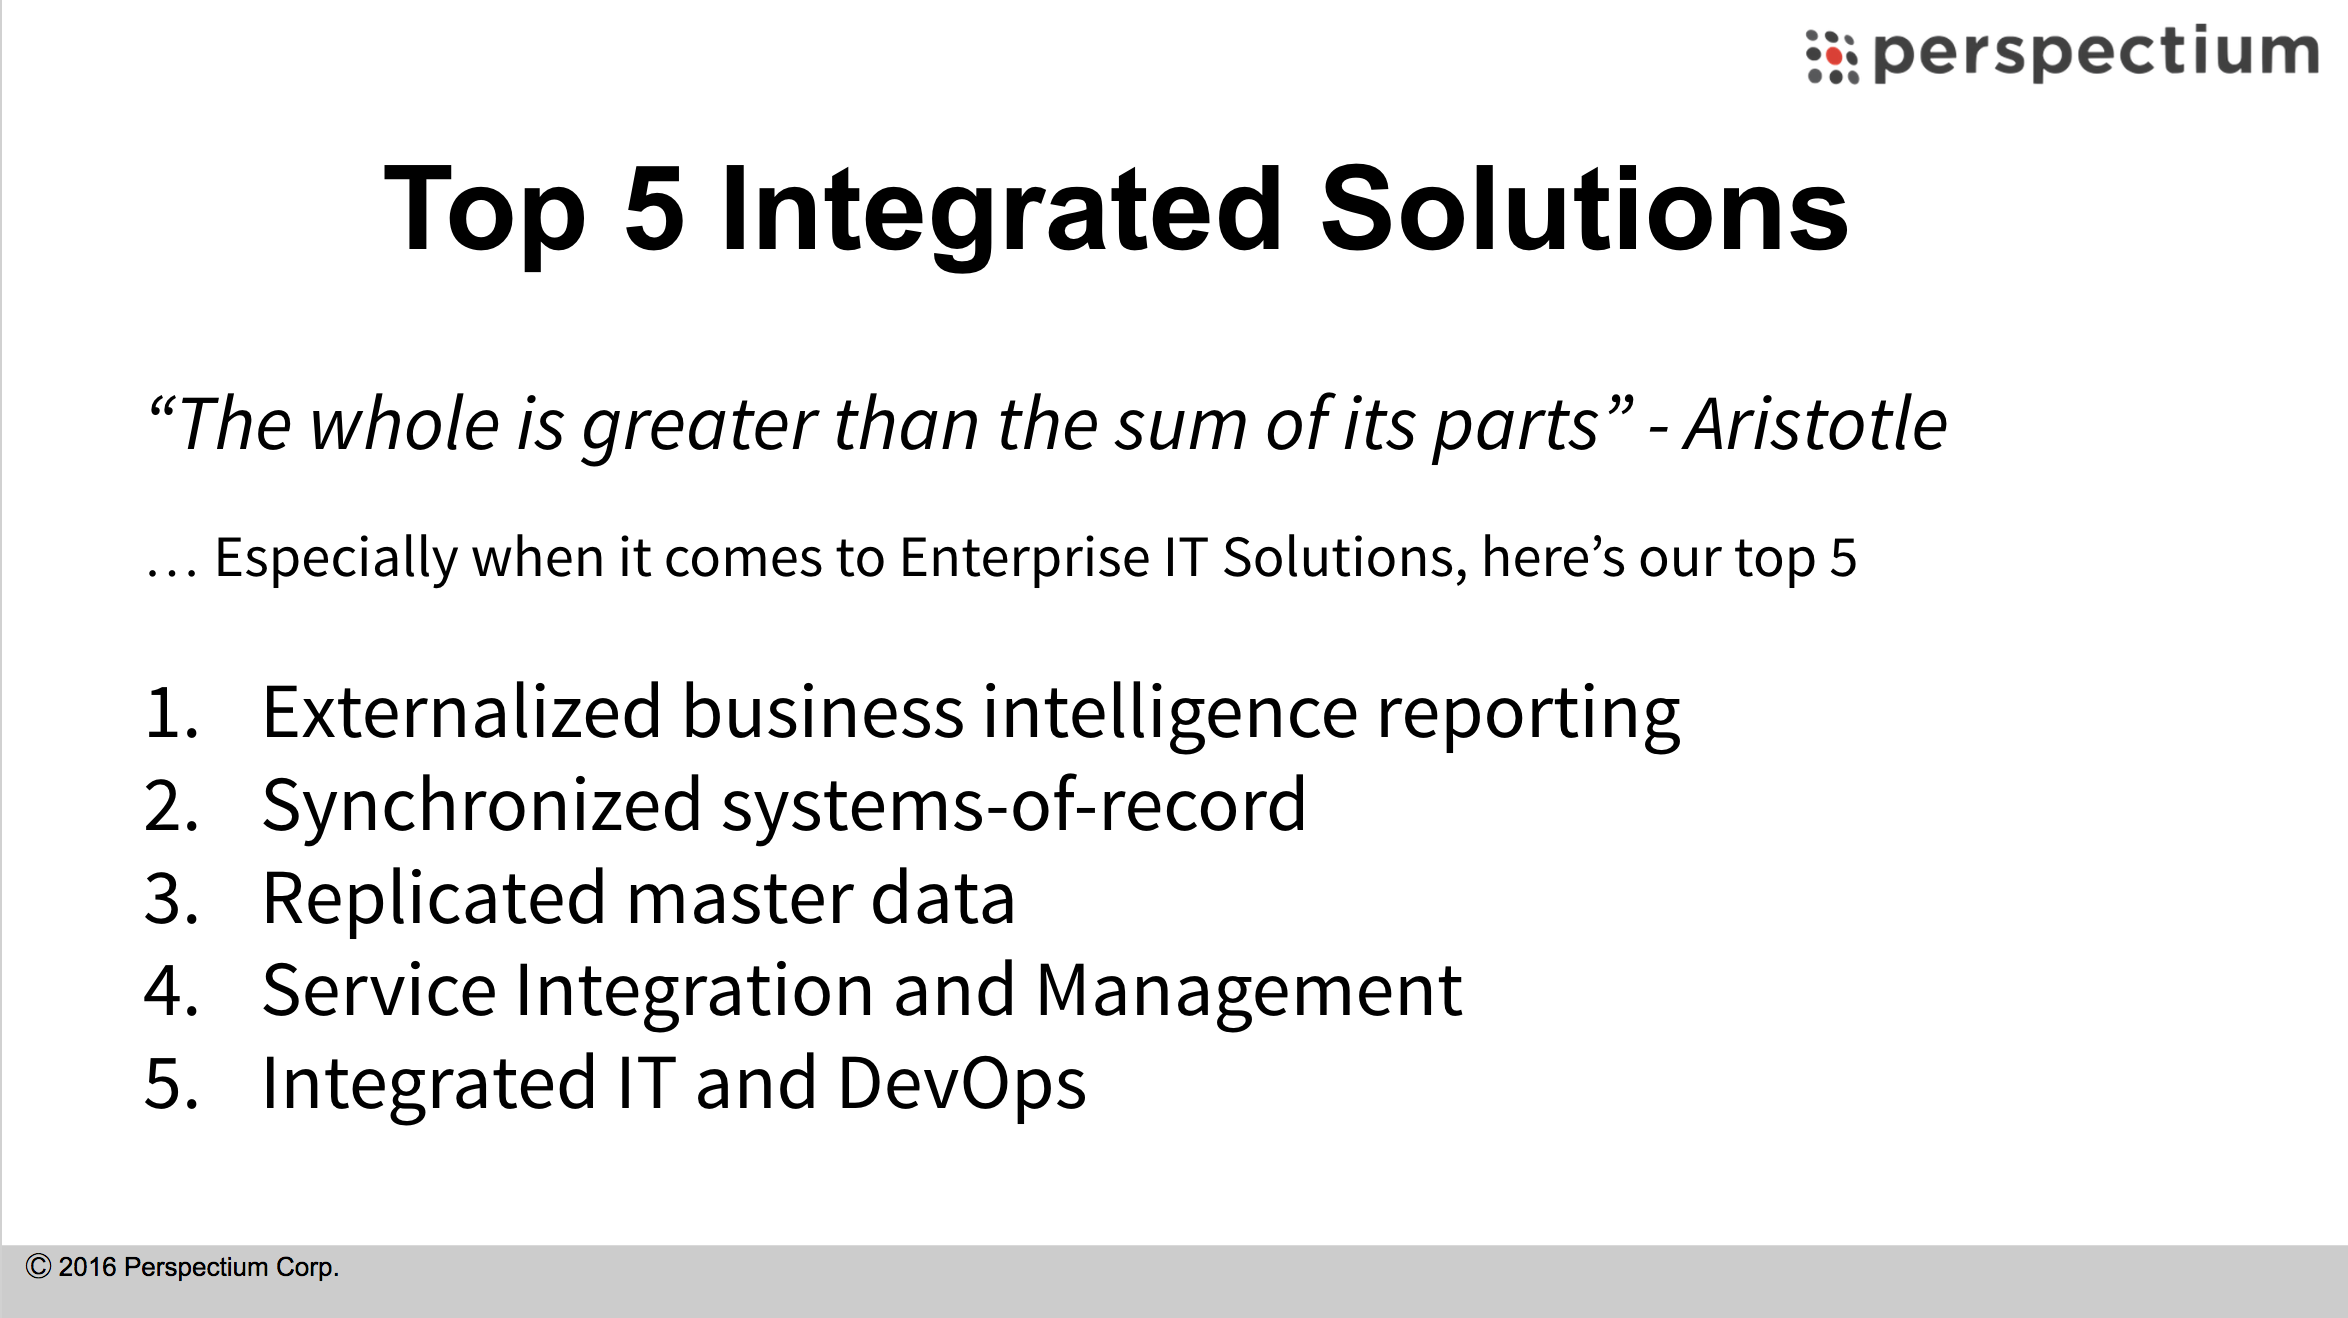 Top 5 Integrated Solutions